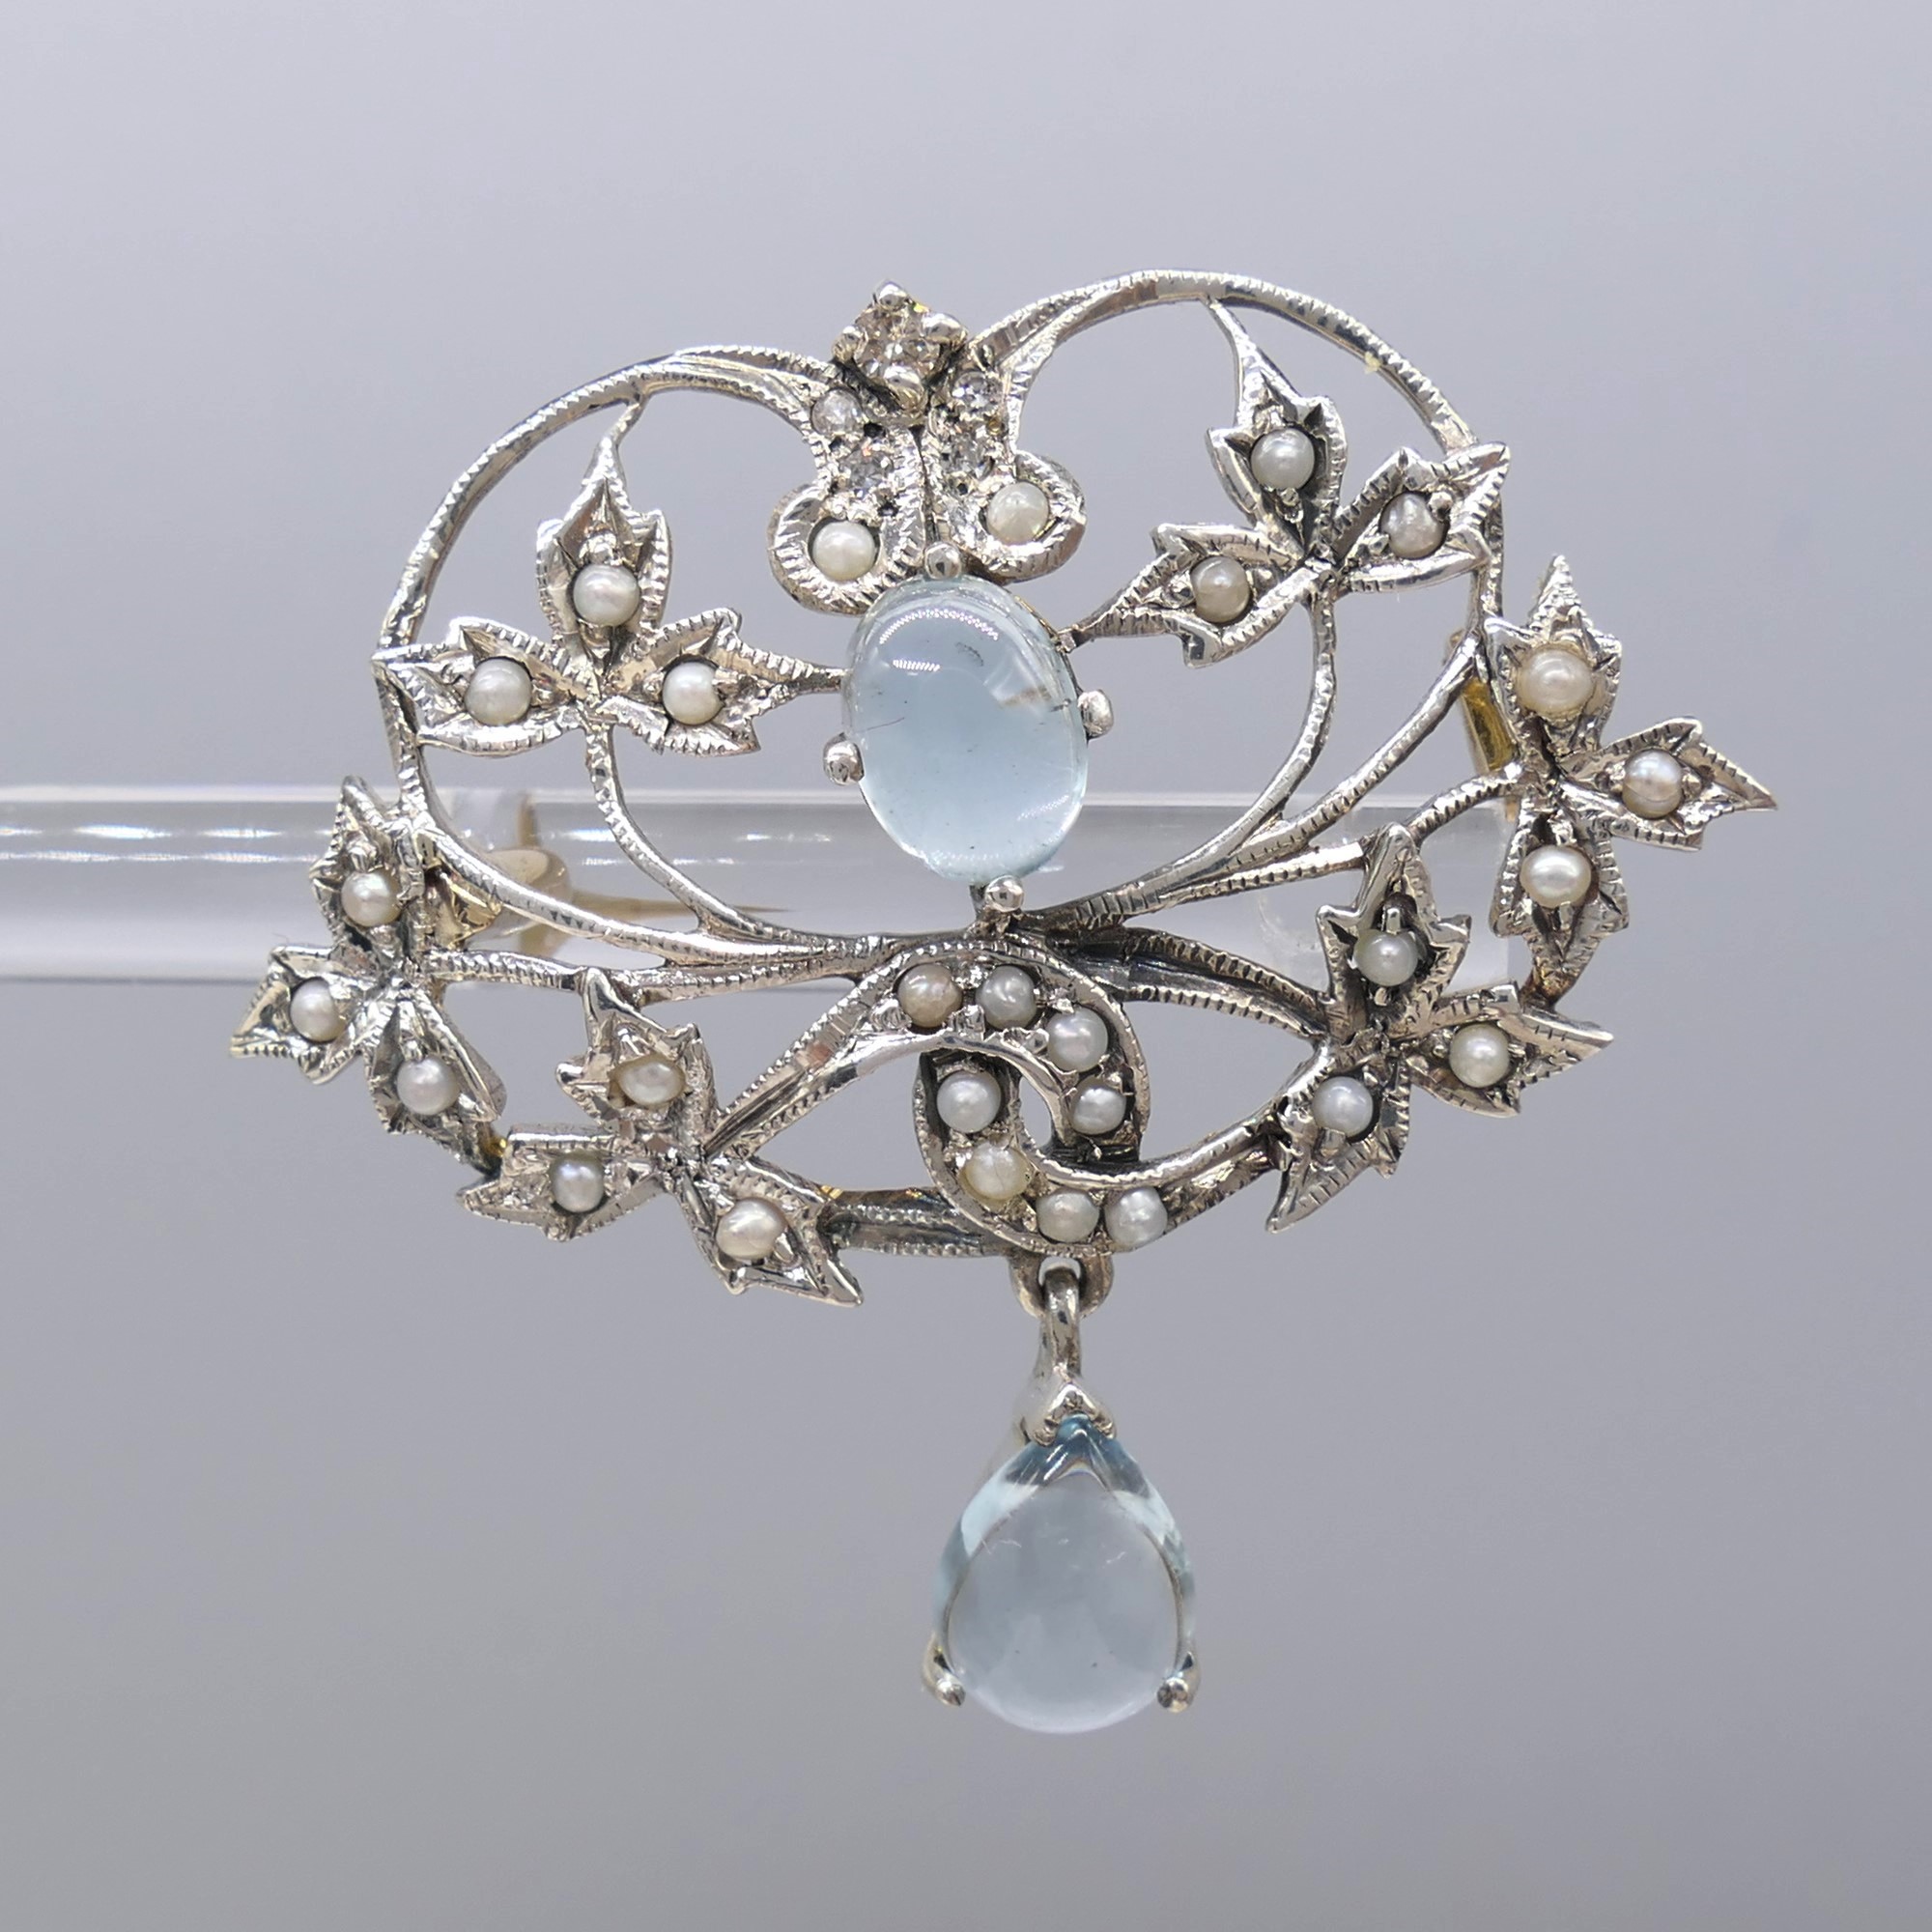 Edwardian-Style Topaz And Diamond Brooch With 2 Pi - Image 3 of 7